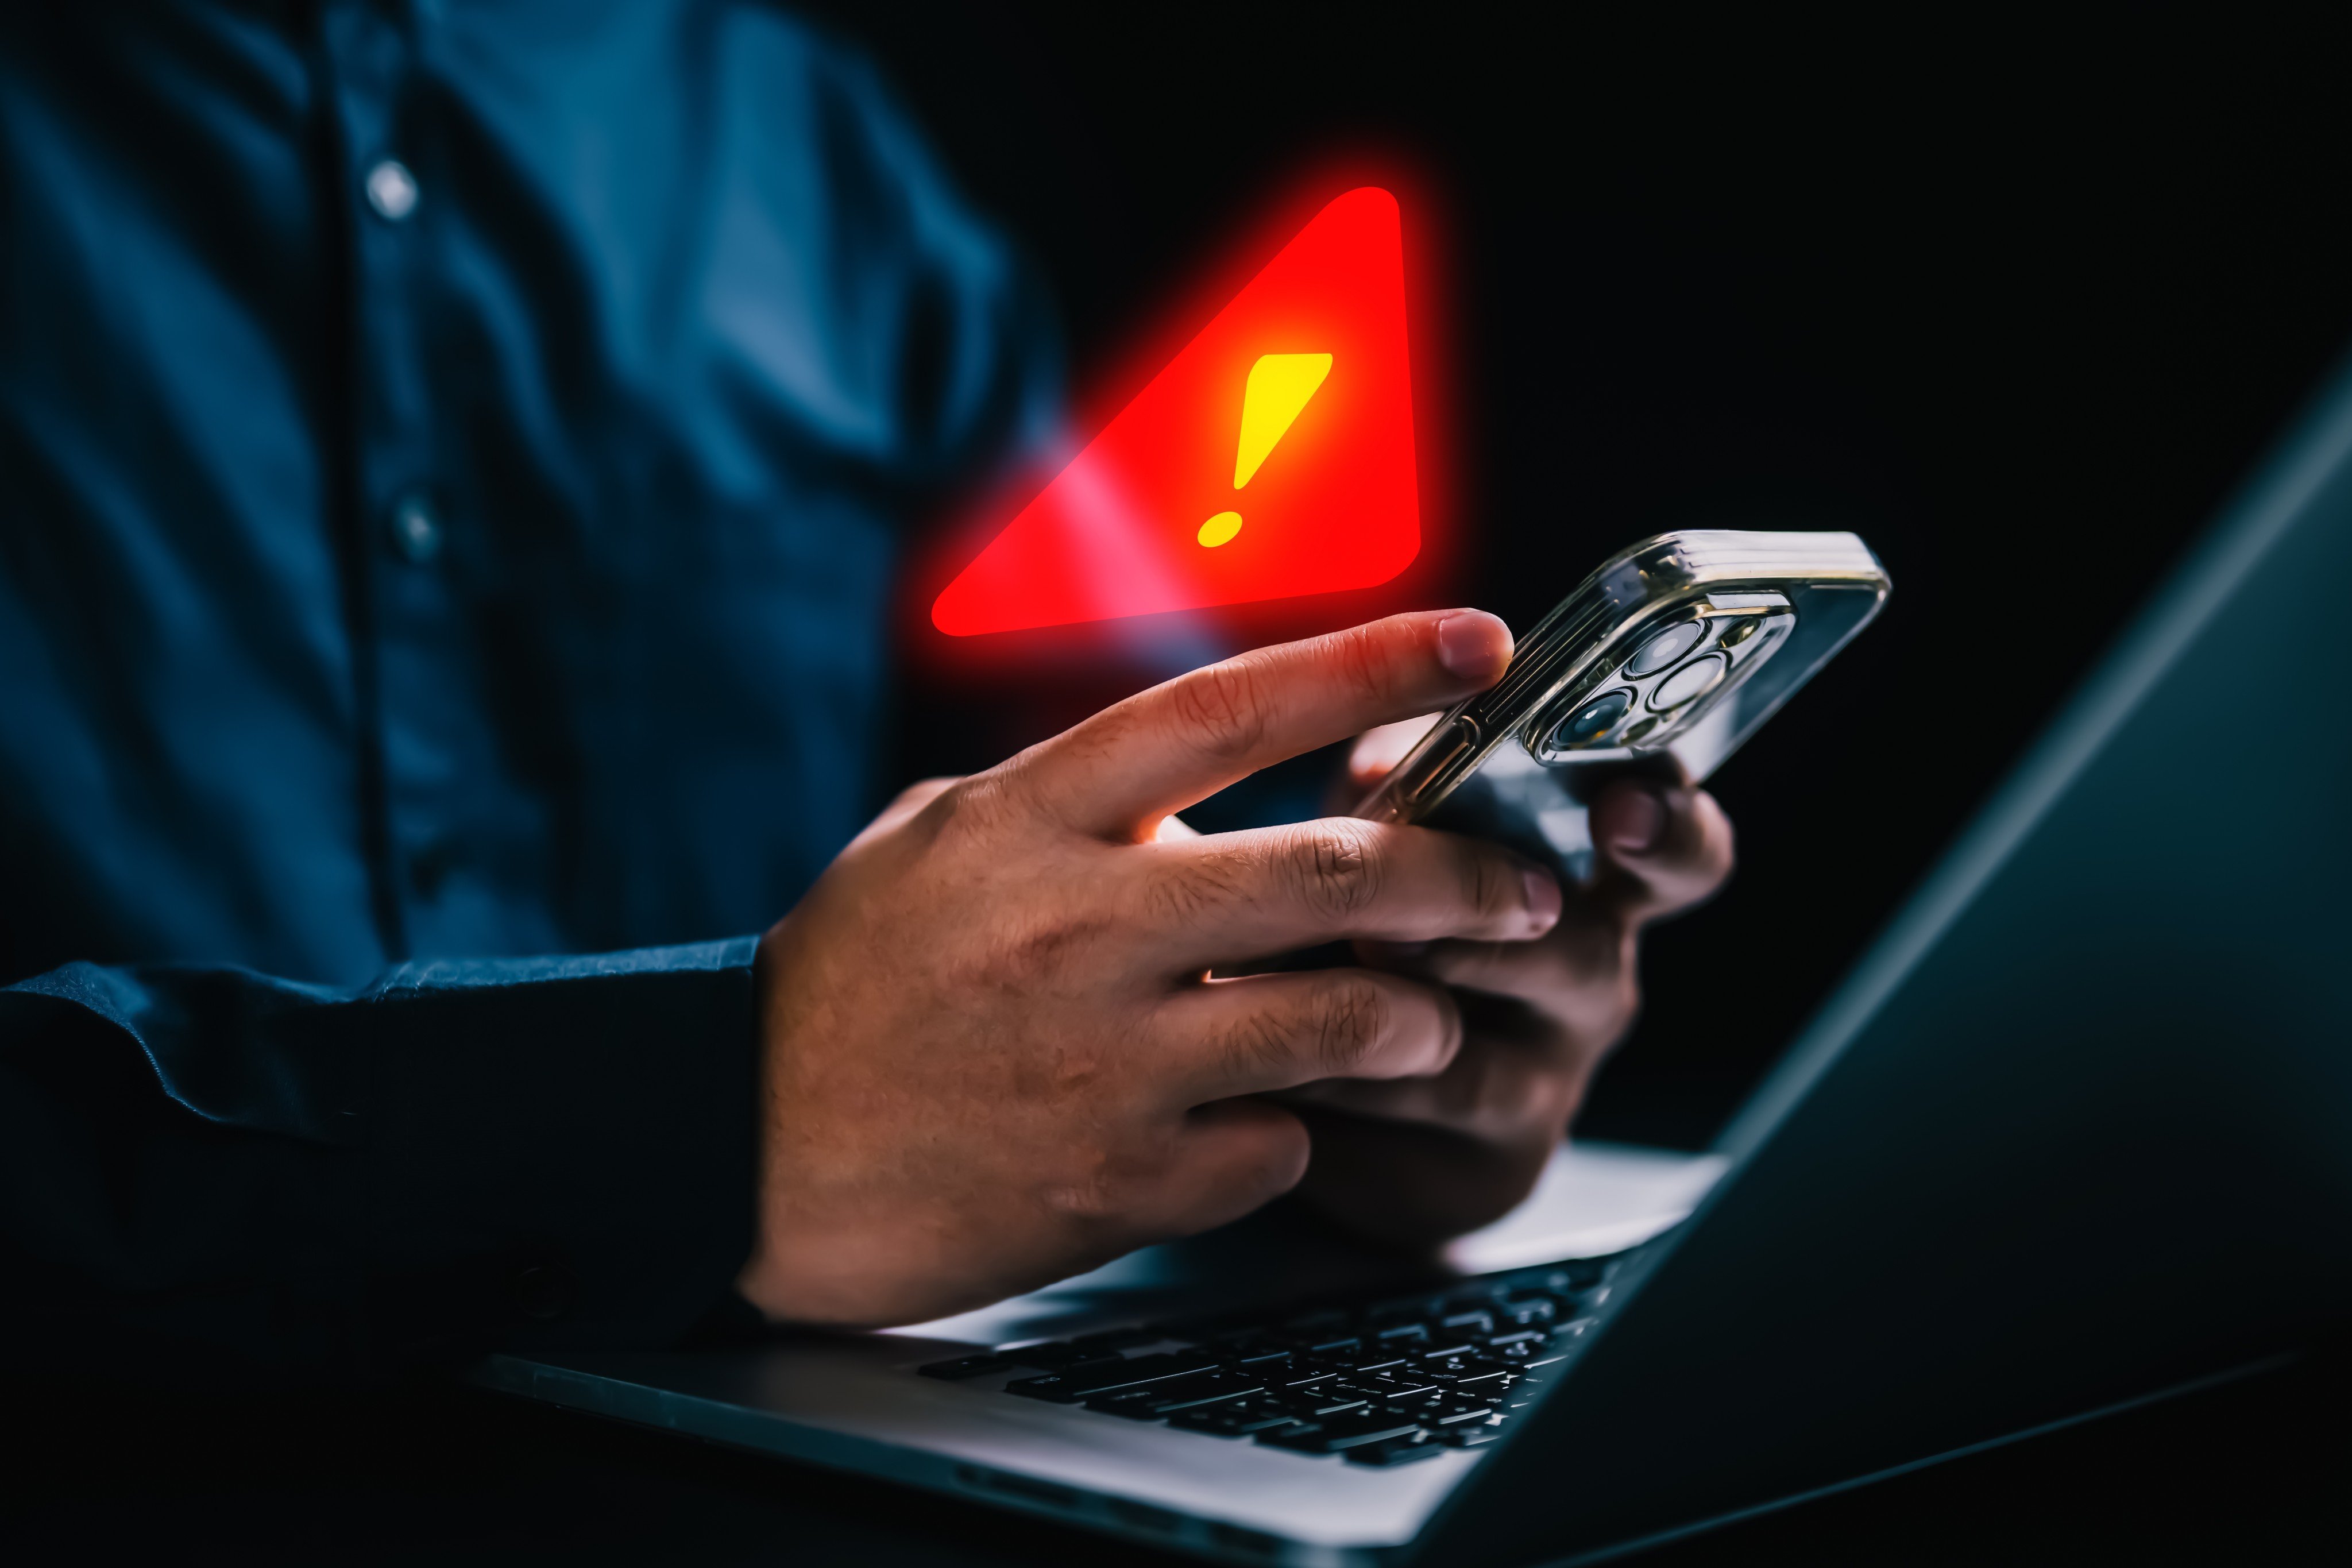 There is a rising trend of SMS messages asking users to reset passwords to allegedly hacked accounts, an expert has warned. Photo: Shutterstock